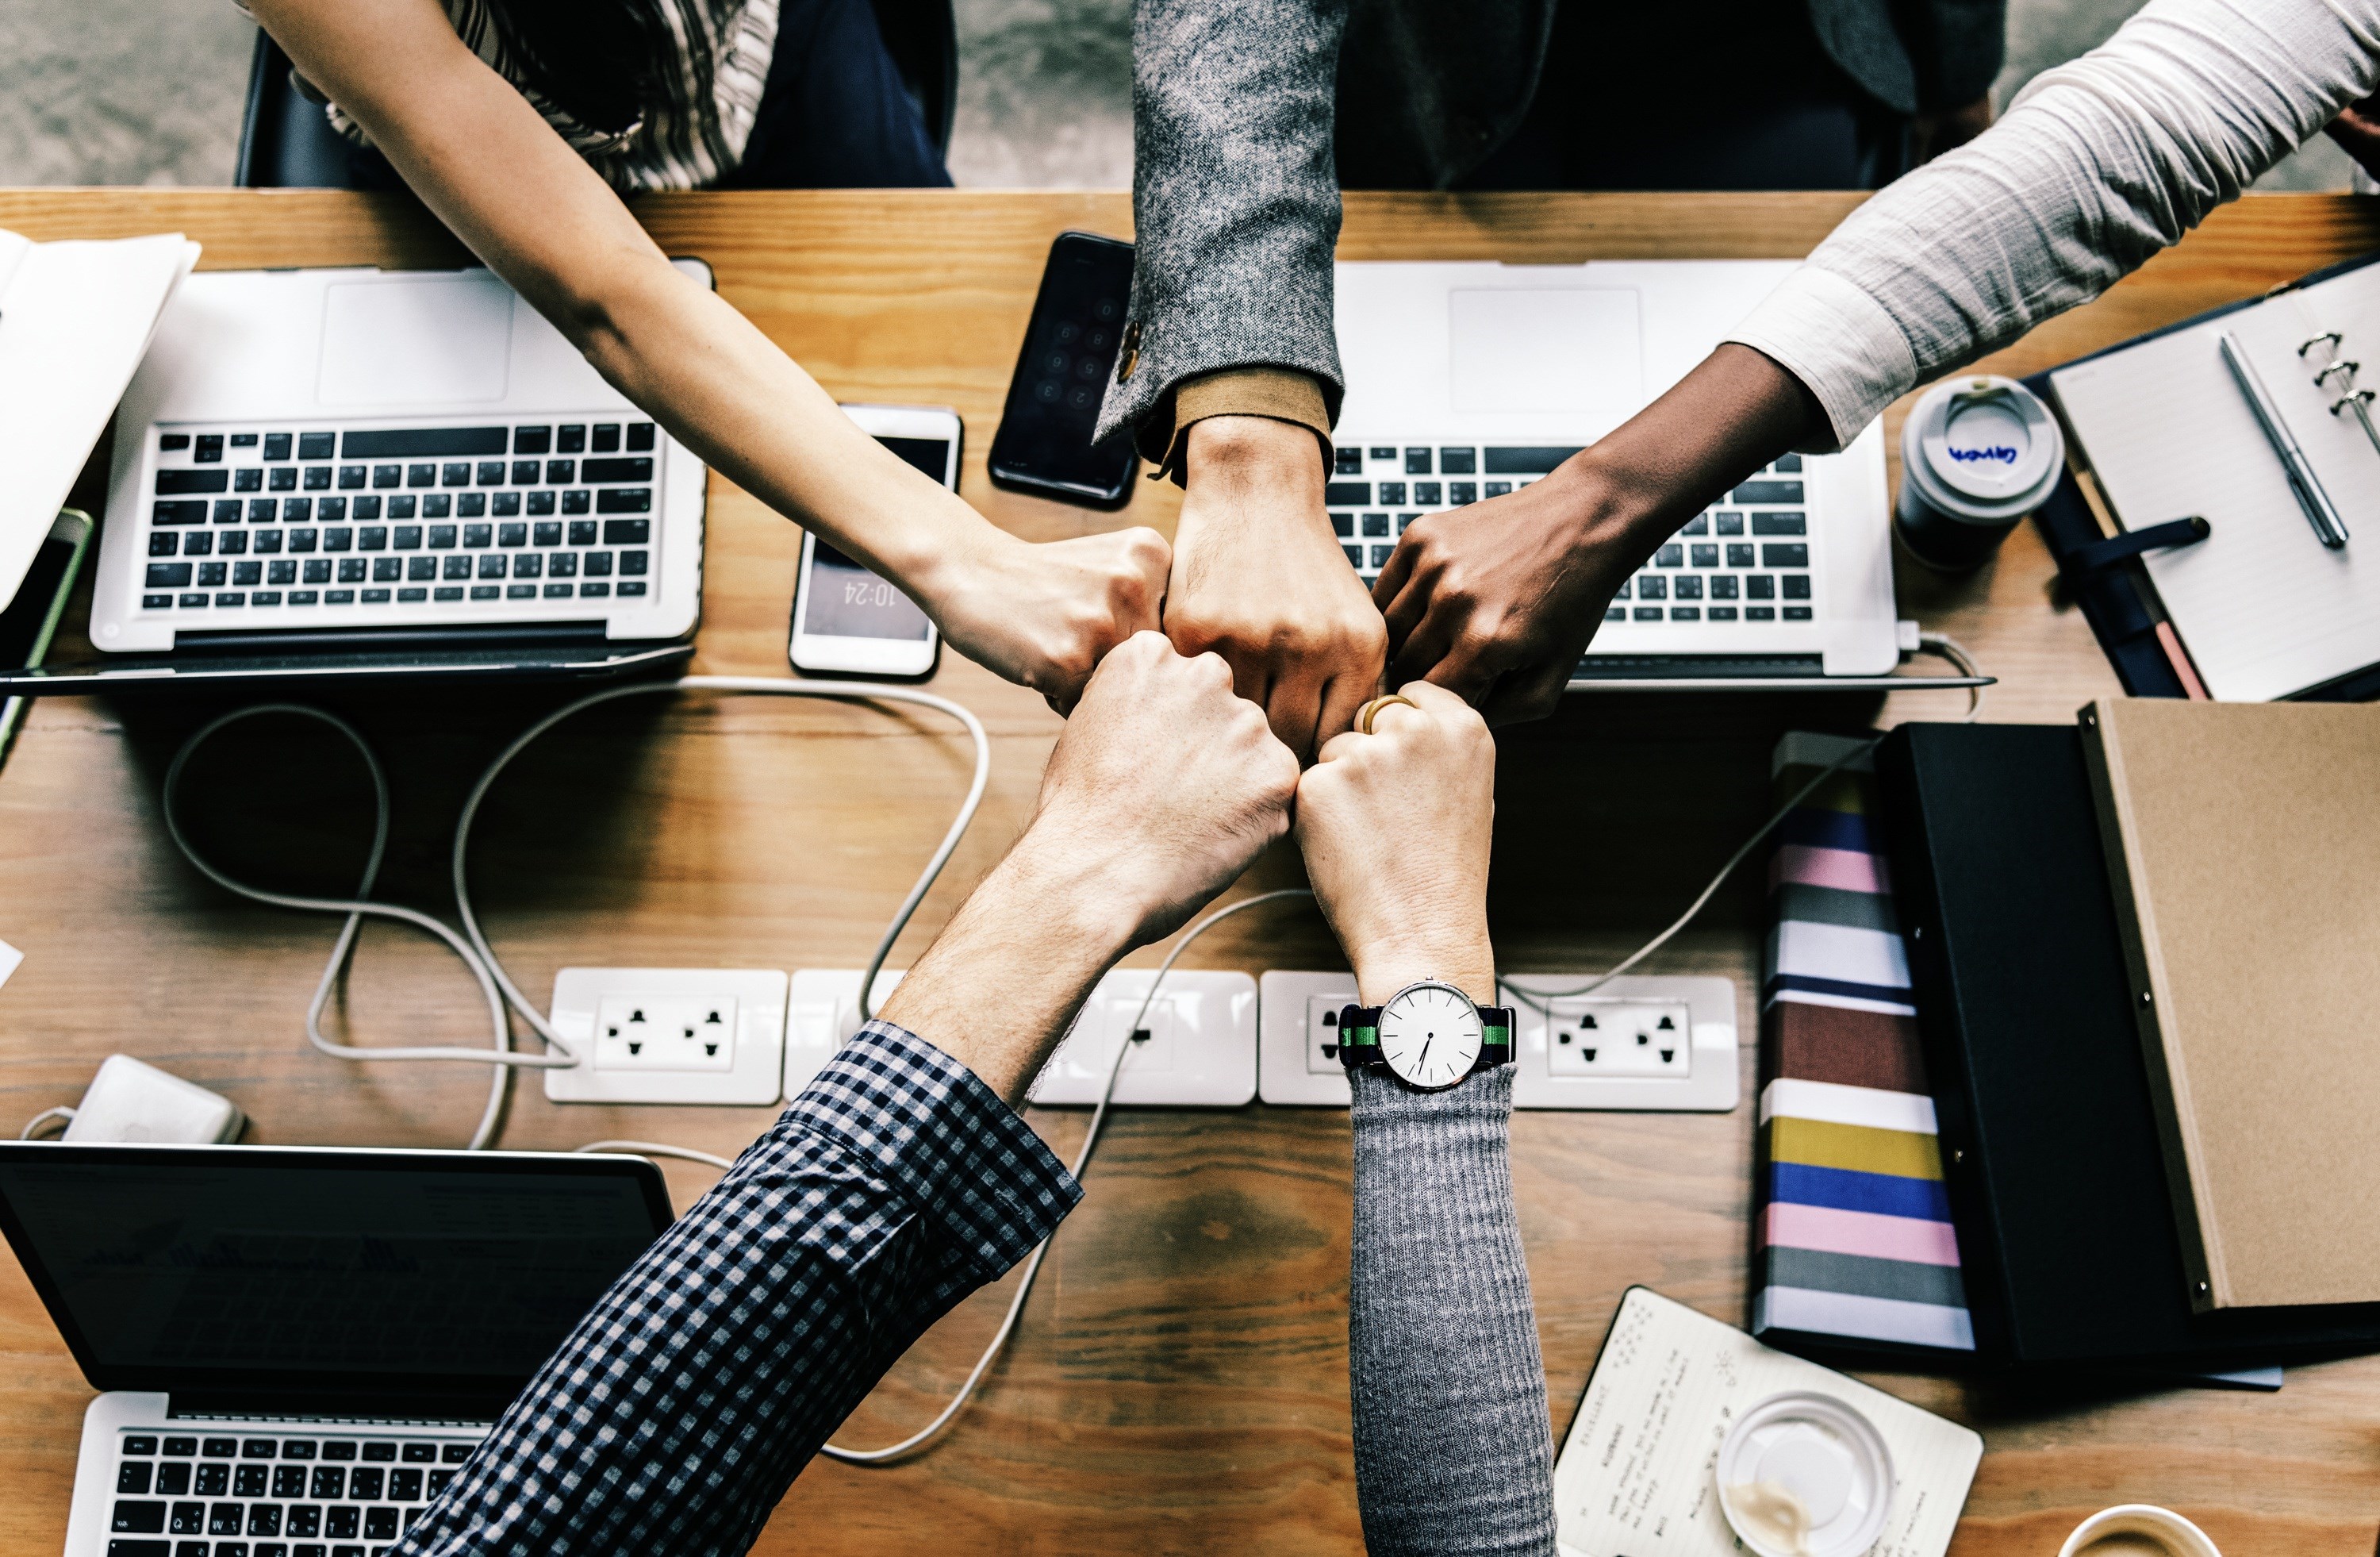 4 tips for managing distributed project teams